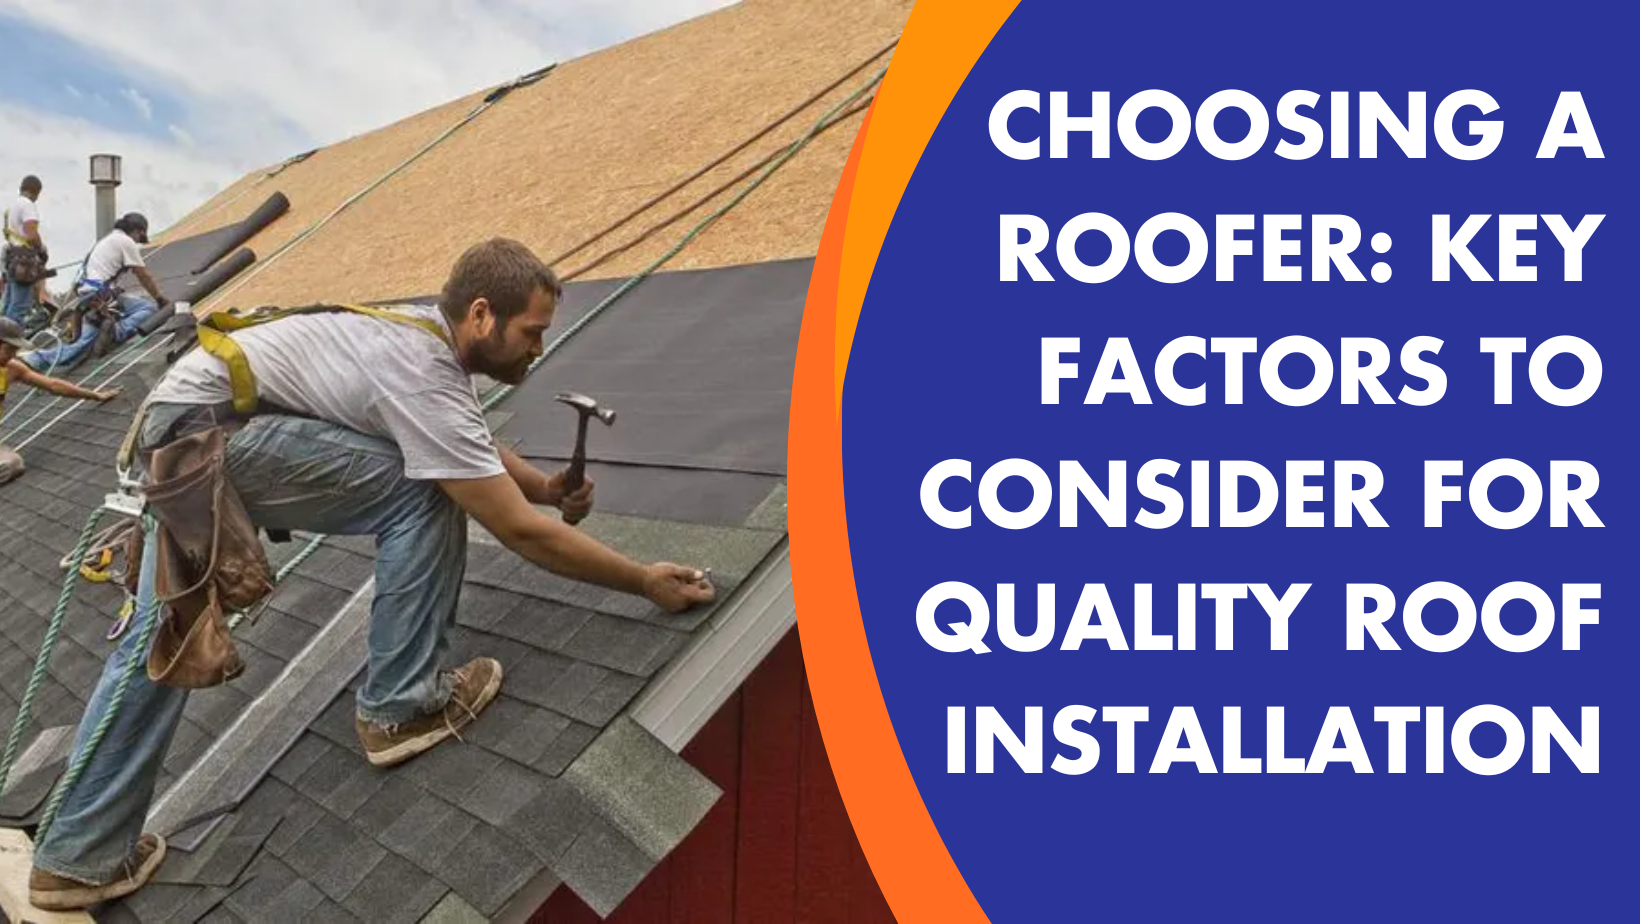 Key Factors To Consider for Quality Roof Installation